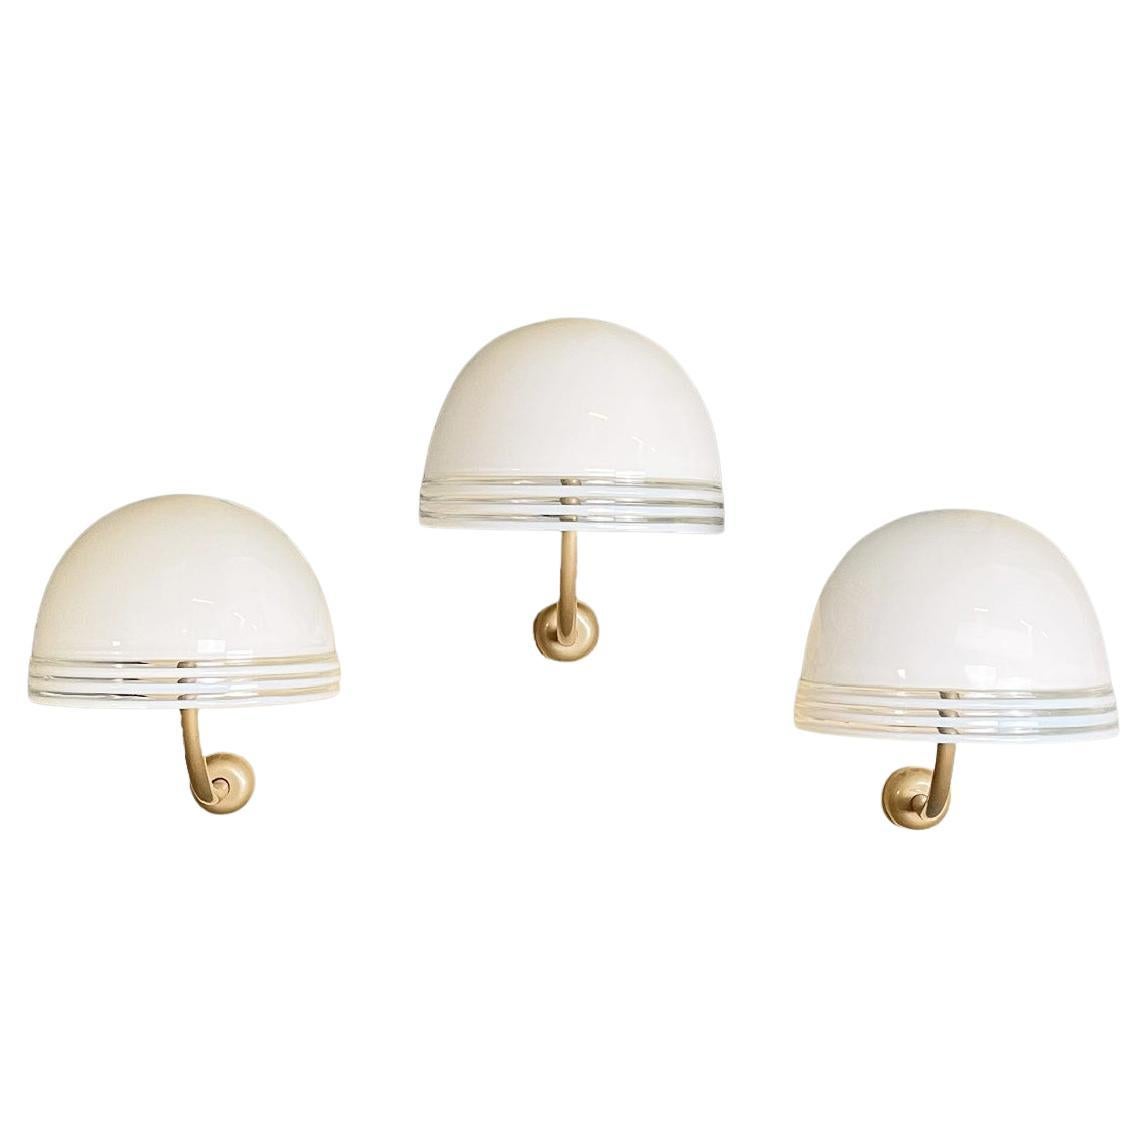 Italian modern Murano white glass and golden metal appliques by Leucos, 1980s